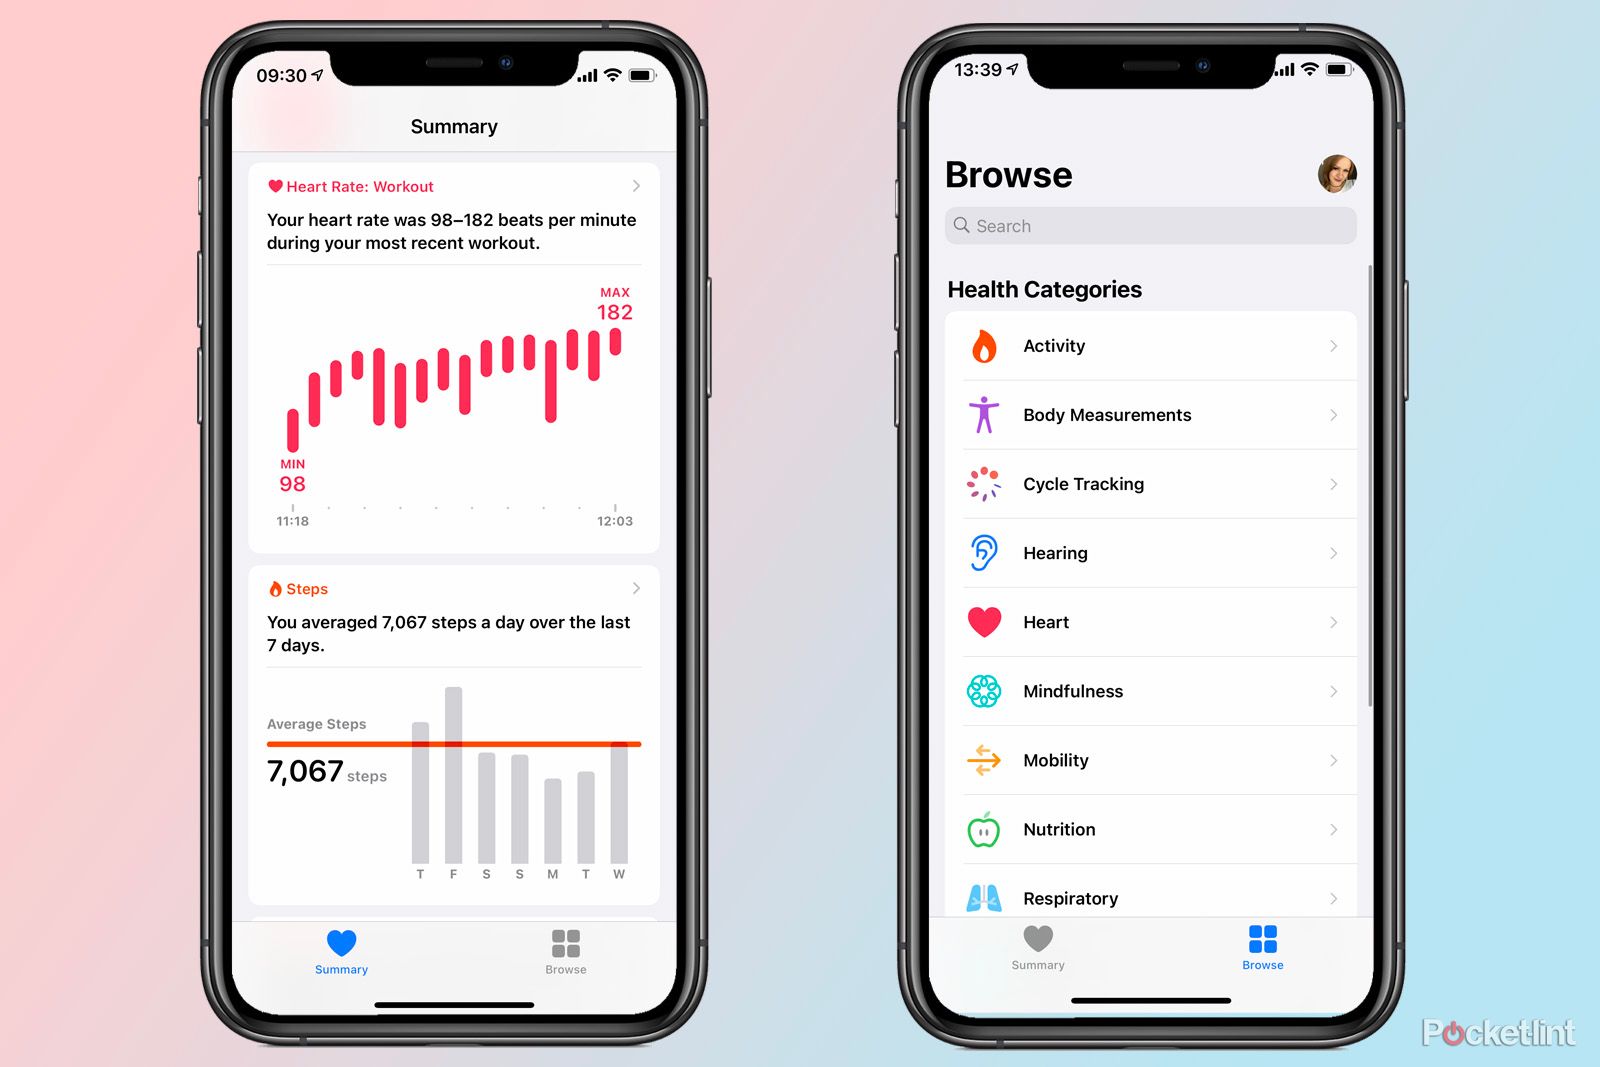 Apple Health app: What is it and does work?